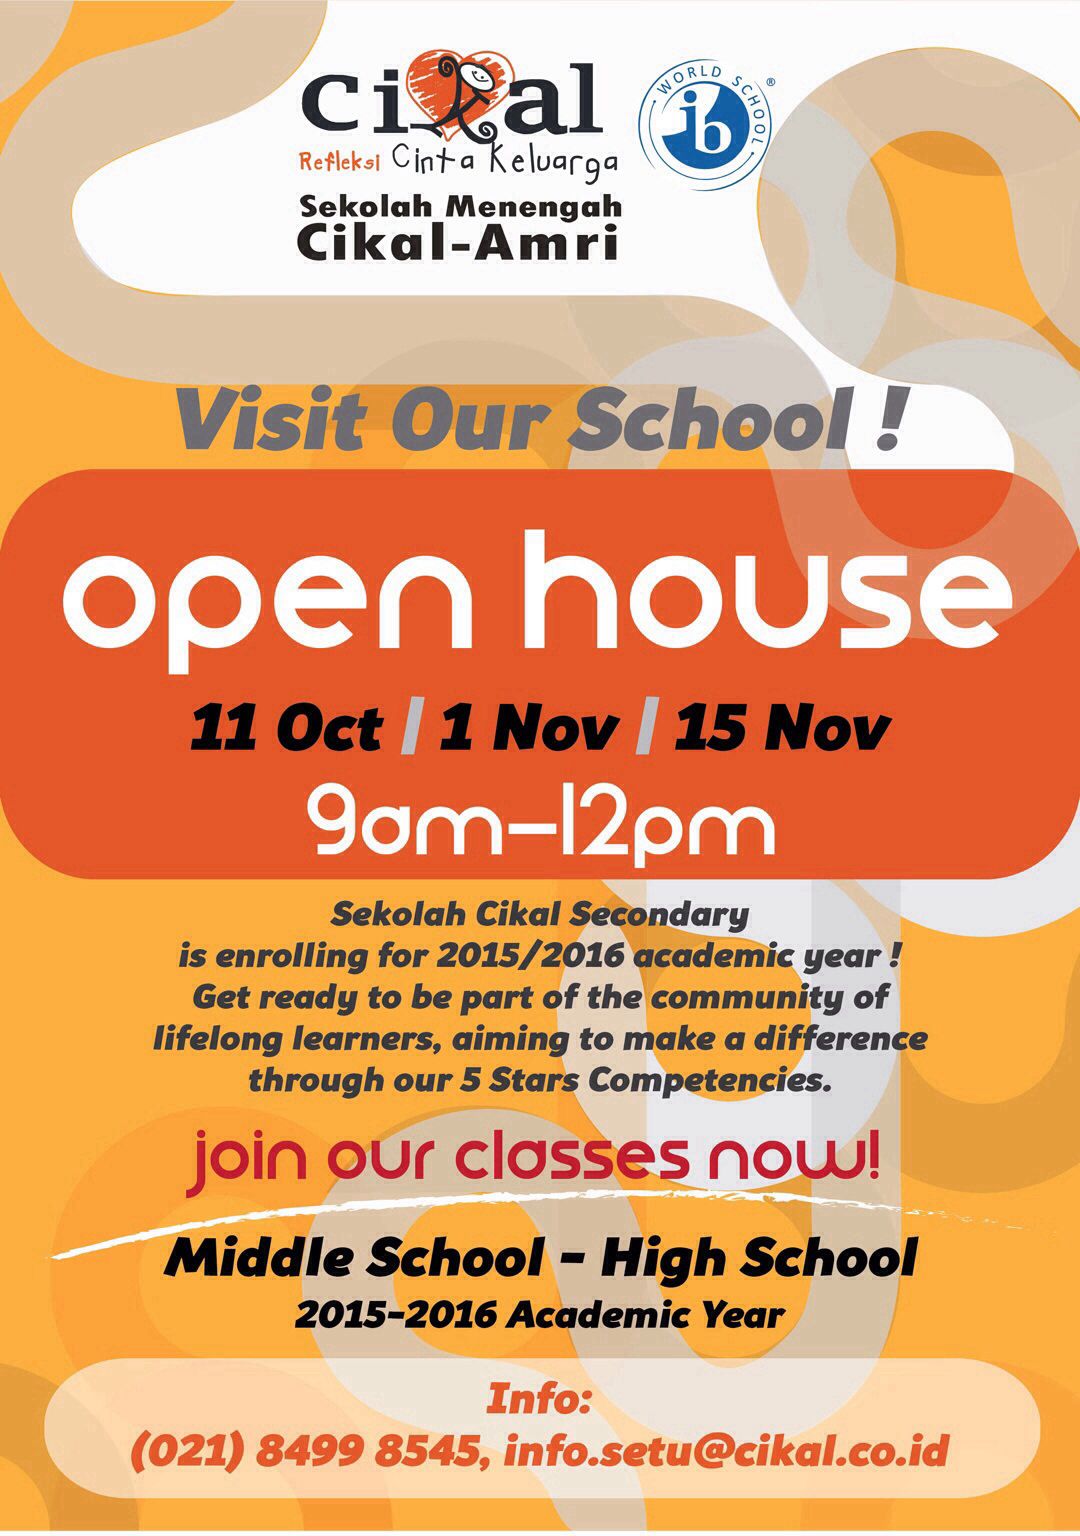 high school open house flyer, senior high school flyers sample, flyers for senior high school, high school admission flyer, high school flyers design, flyers for education, college admission poster template, open house flyer for school, open house flyer ideas